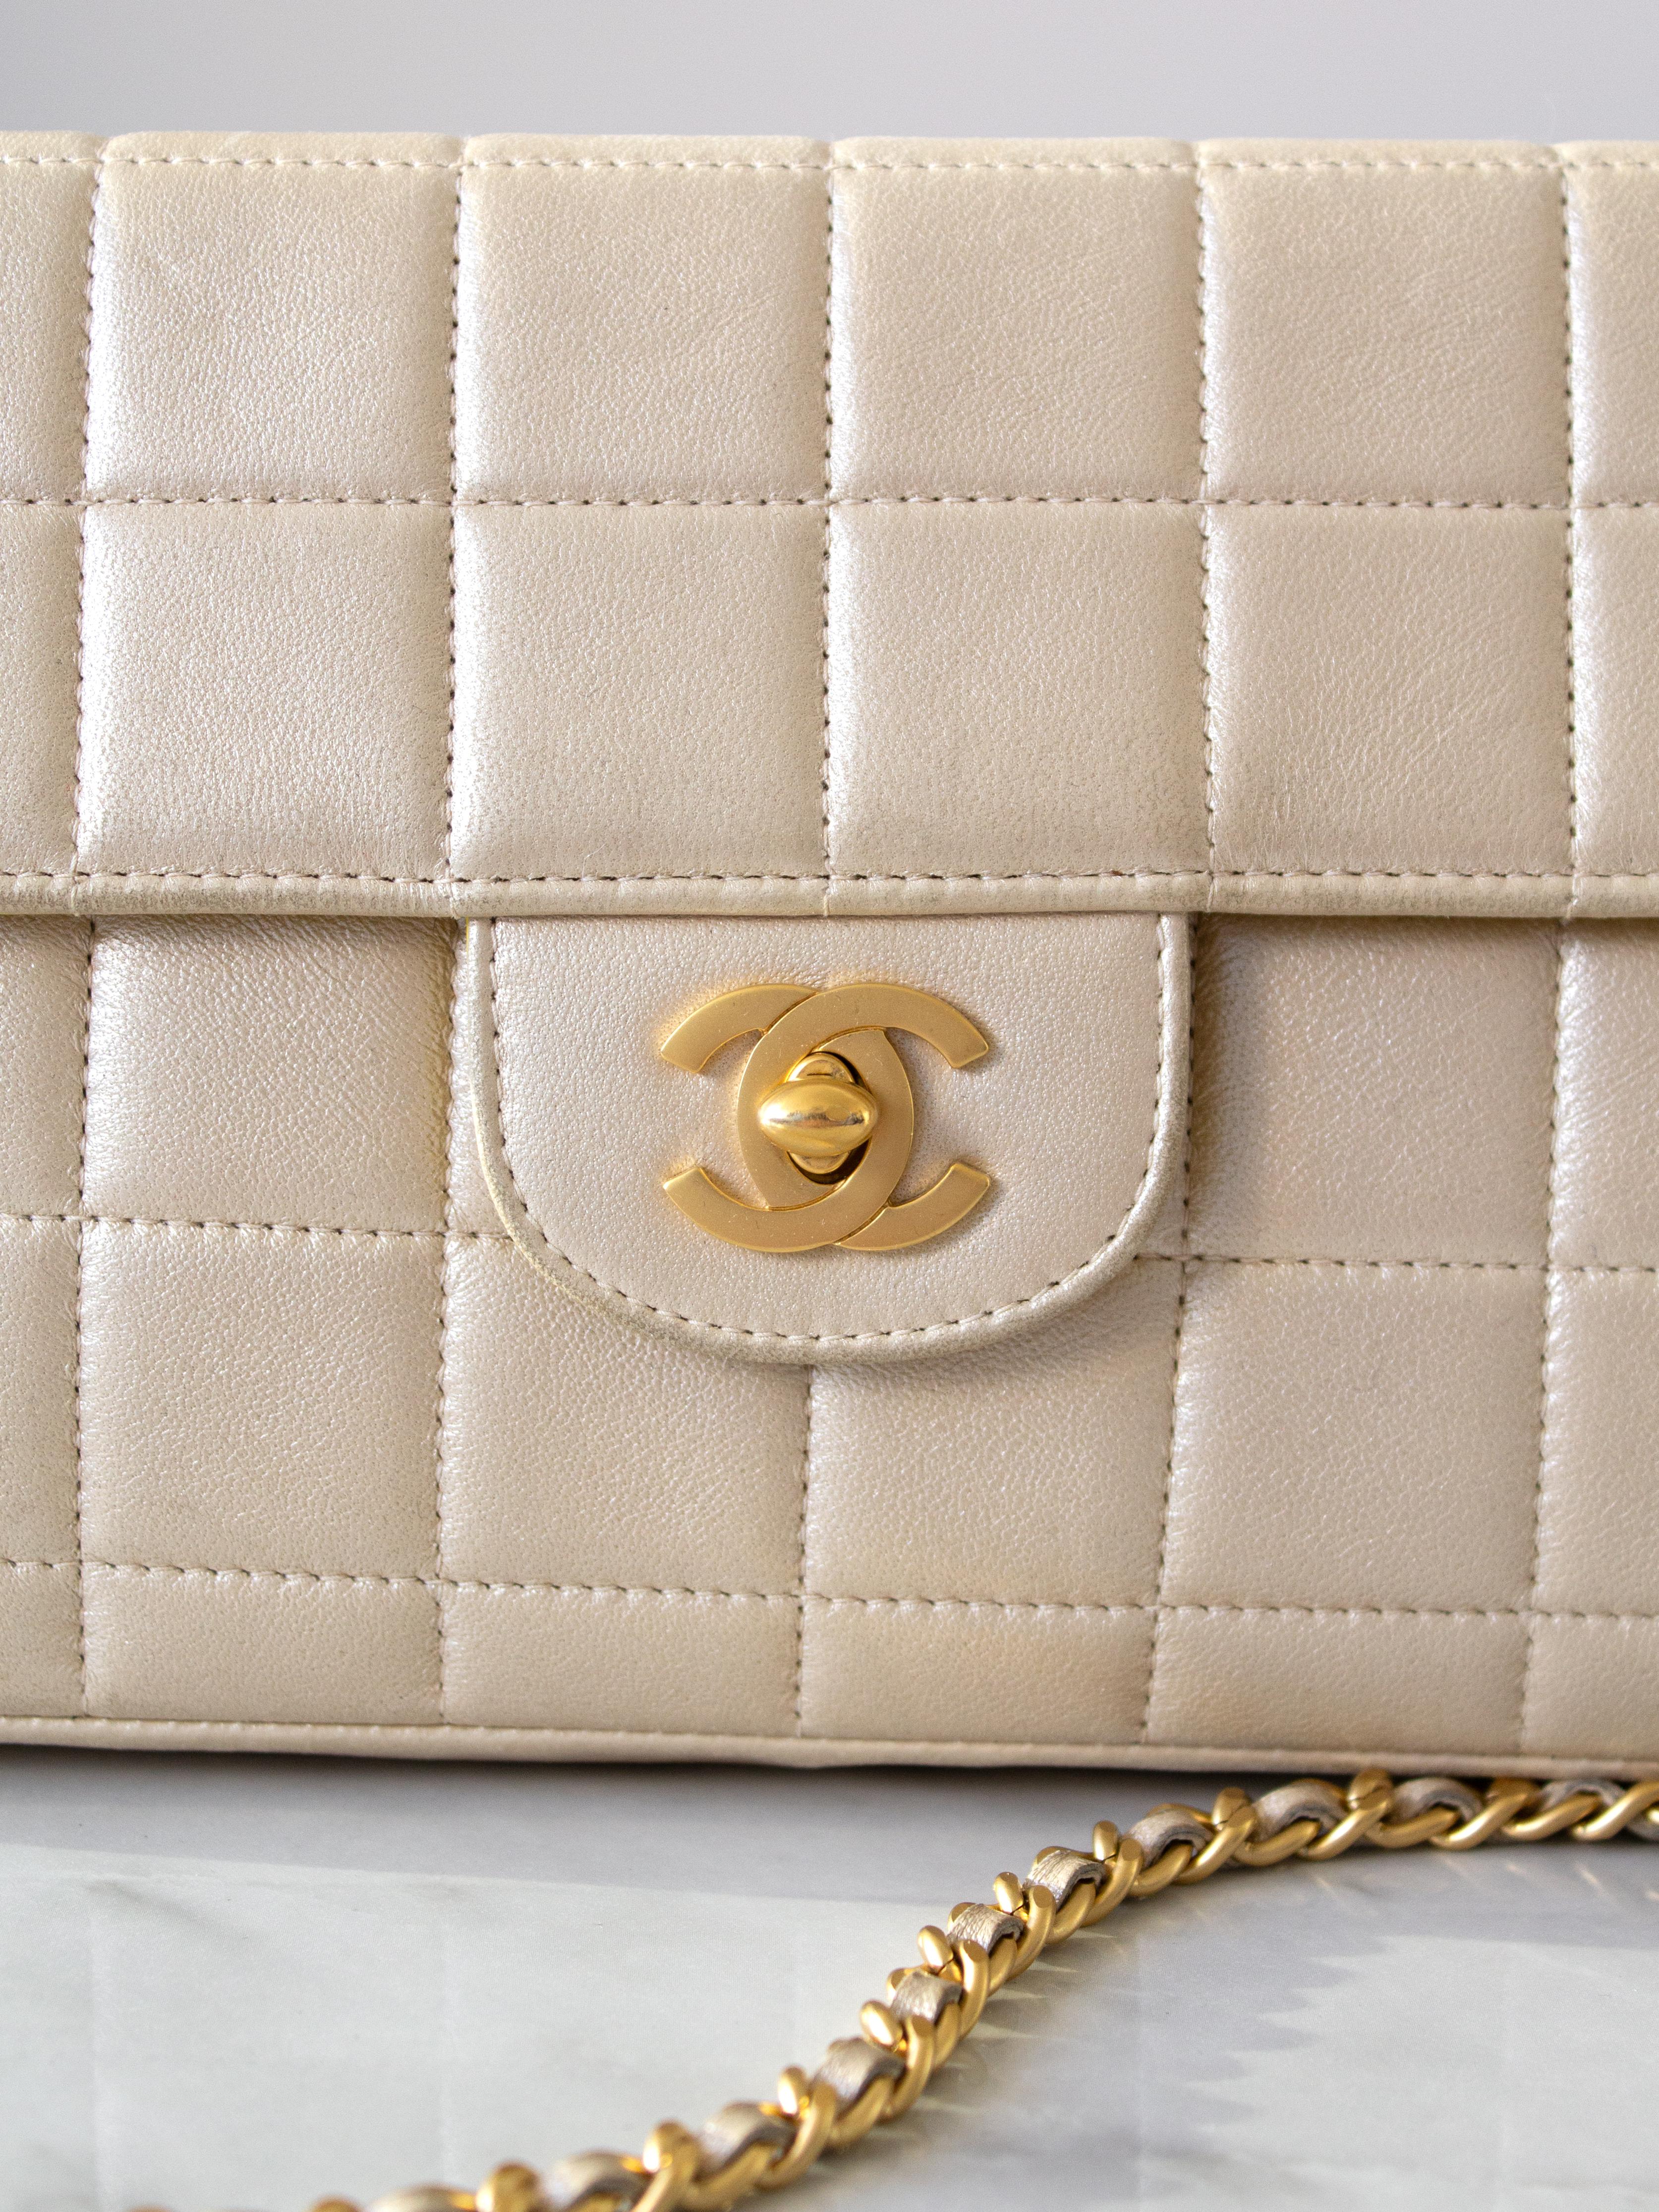 Embrace Y2K vibes with the iconic Chanel East West bag from 2002. This throwback gem flaunts a trendy baguette silhouette and signature Chocolate Bar quilting. Crafted in a luscious pearly gold leather with vibrant yellow interior, it's both chic